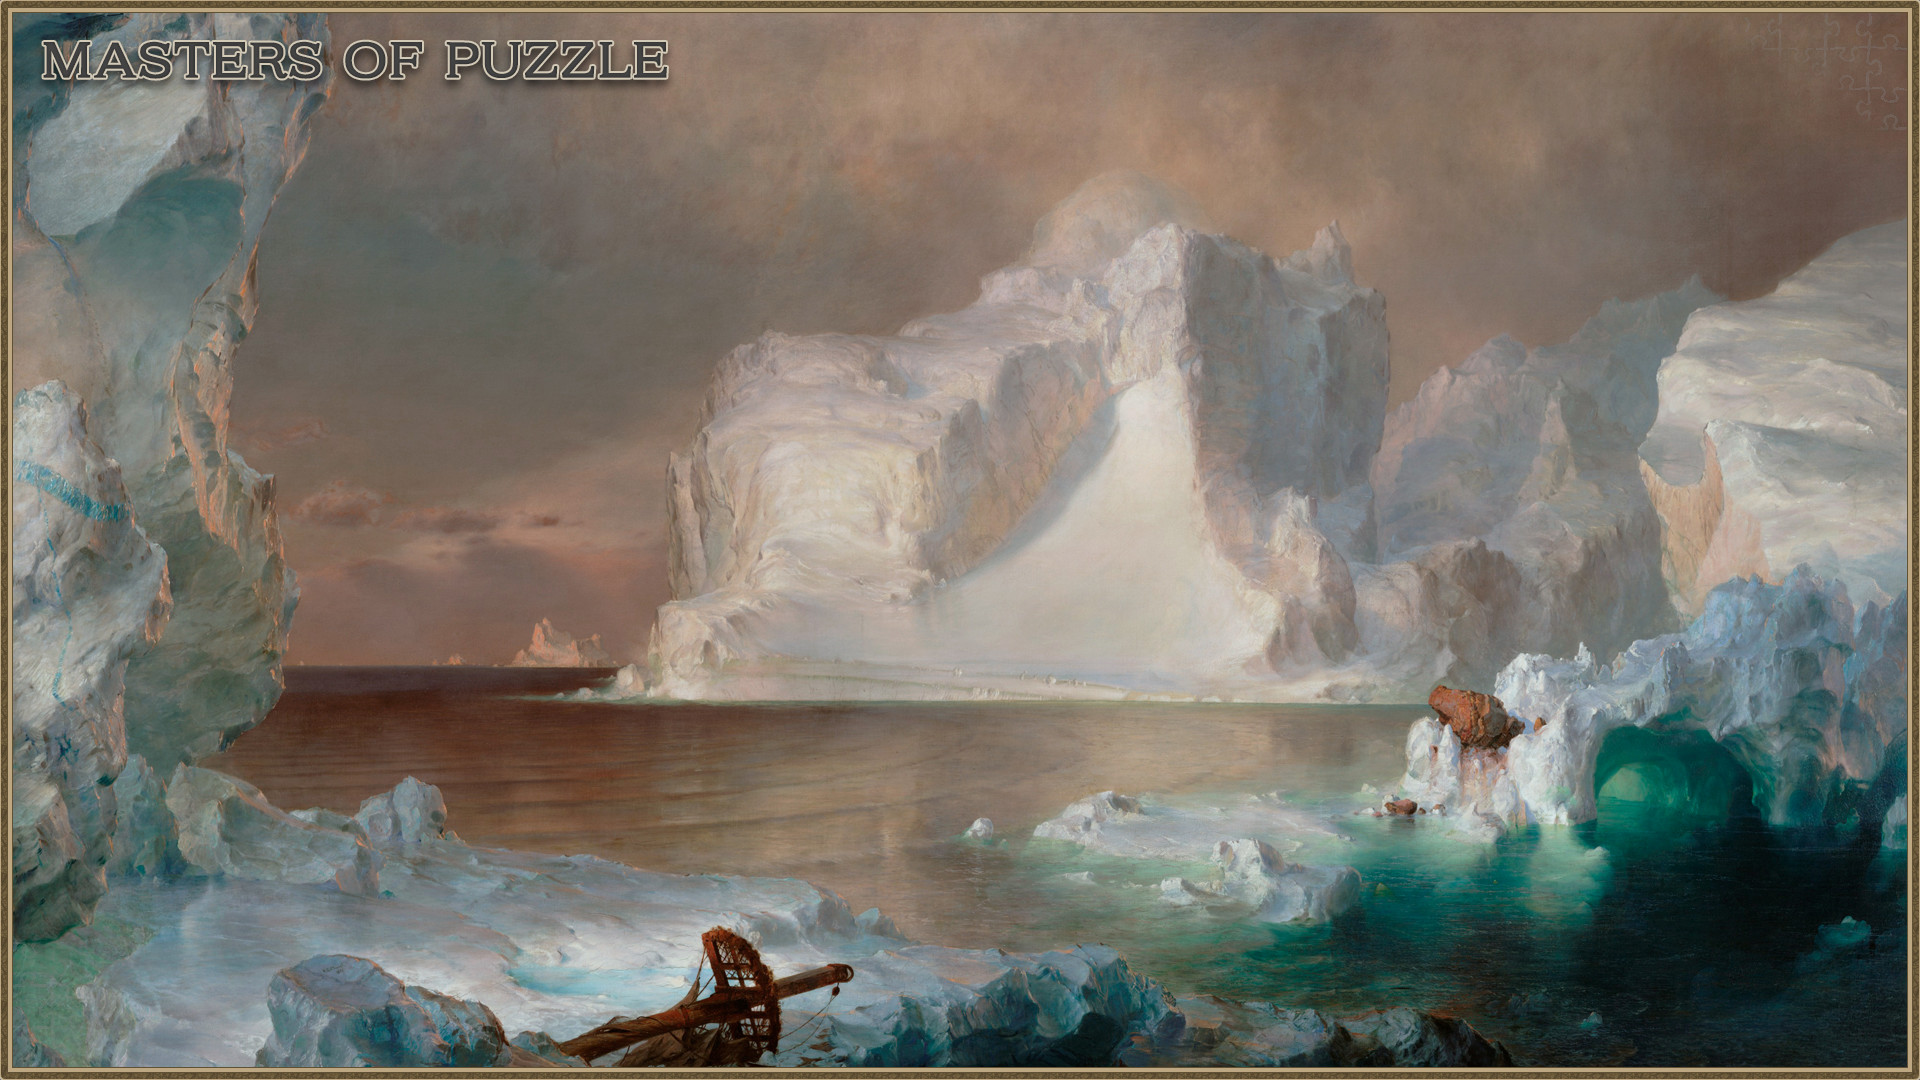 Masters of Puzzle - The Icebergs by F. E. Church screenshot